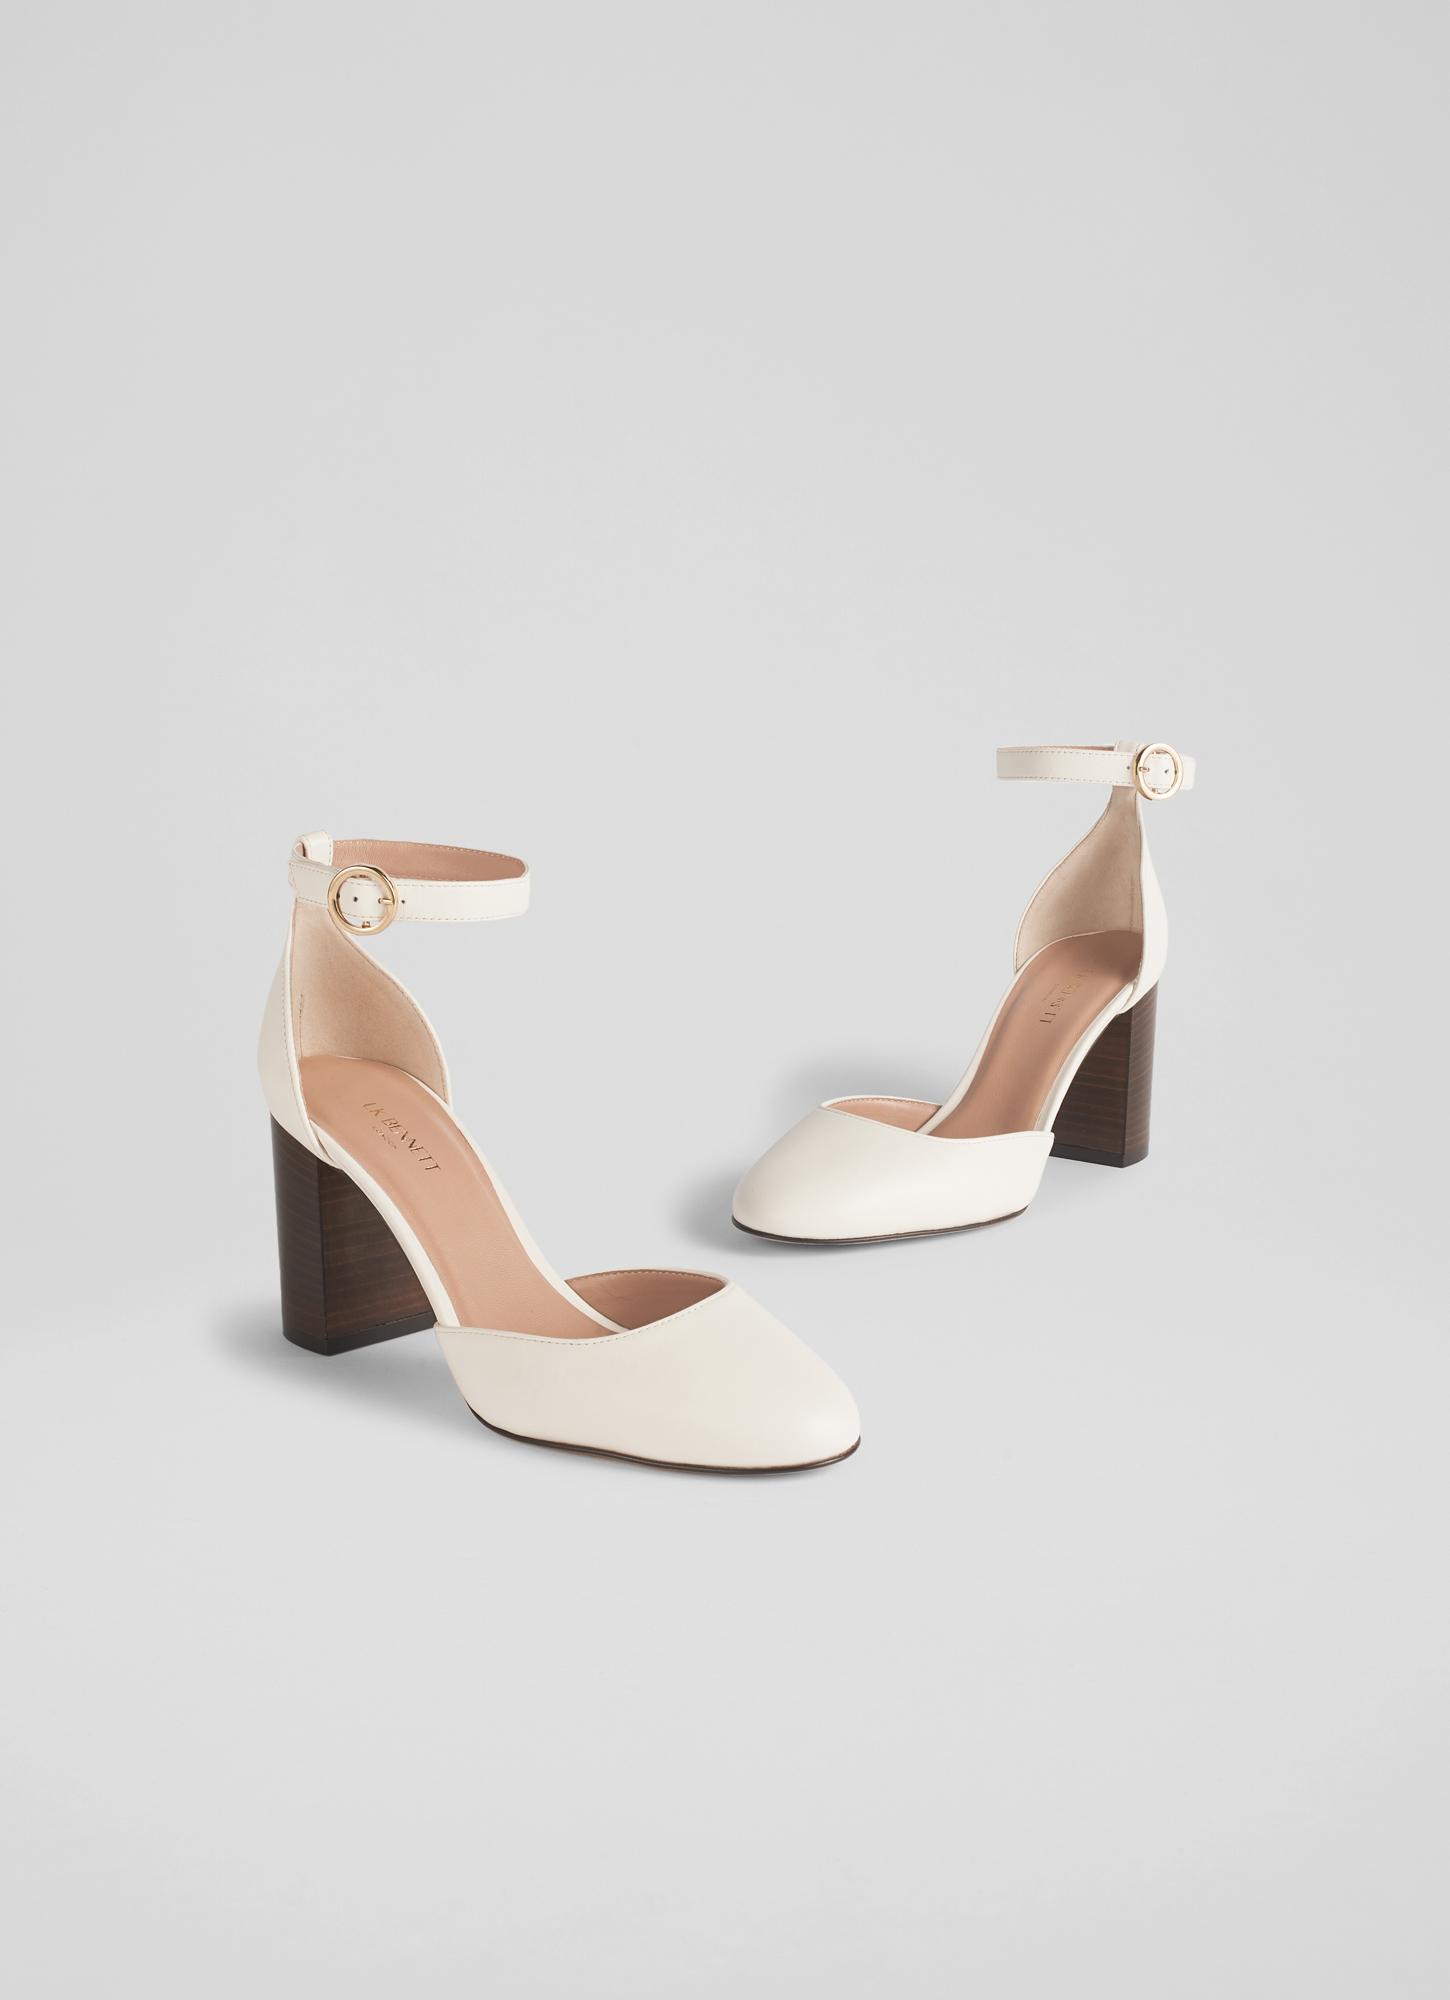 SIMMI Shoes Simmi London Sharon Embellished Knot Strap Heeled Sandals in  Natural | Lyst UK